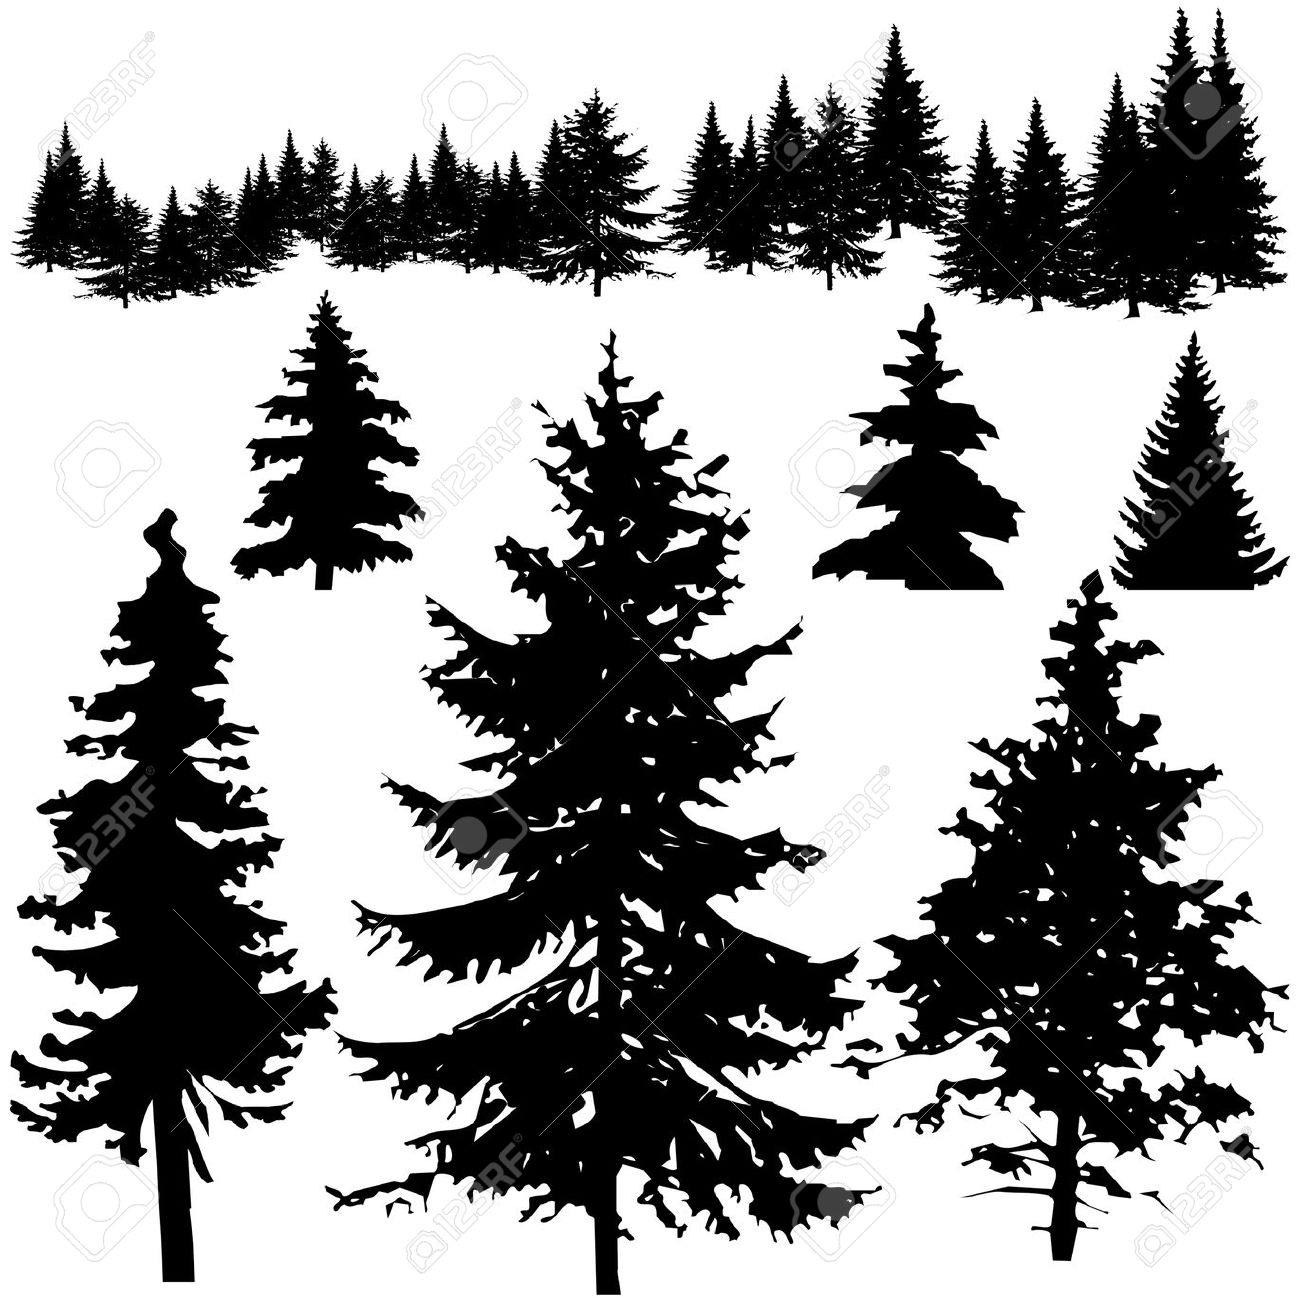 Pine tree silhouette clipart.